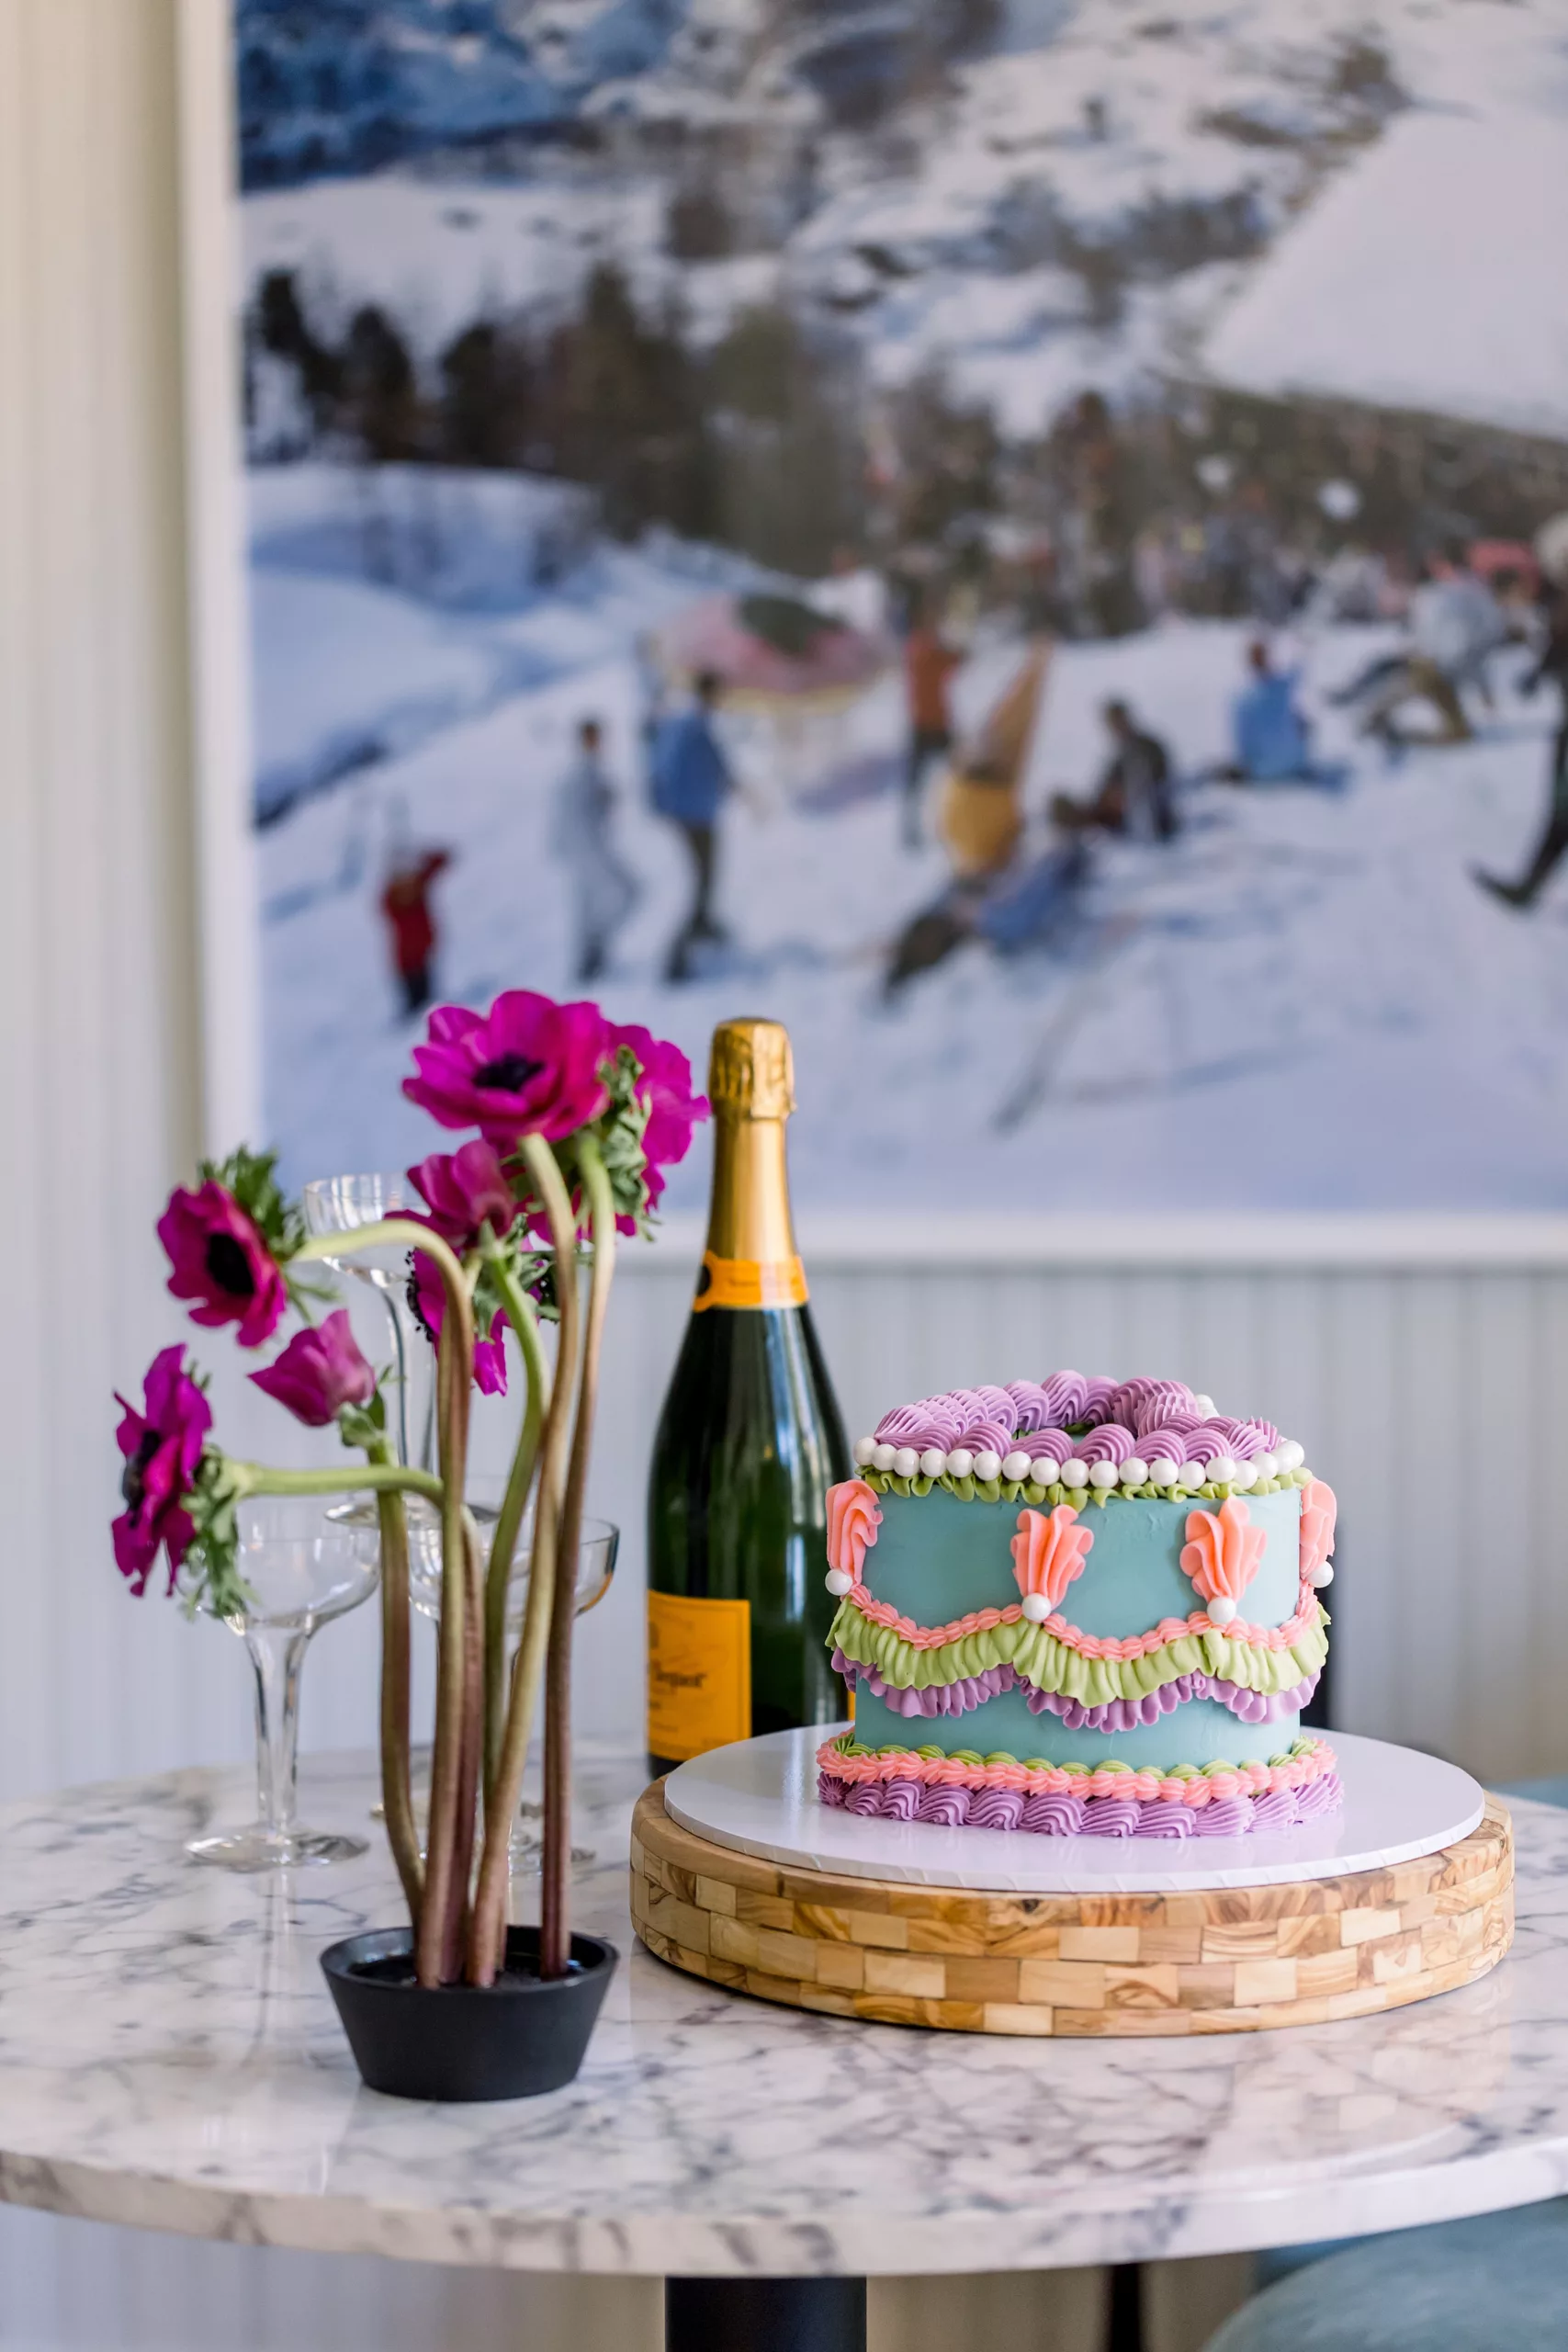 Details of a small colorful wedding cake with a bottle of champagne on a marble table